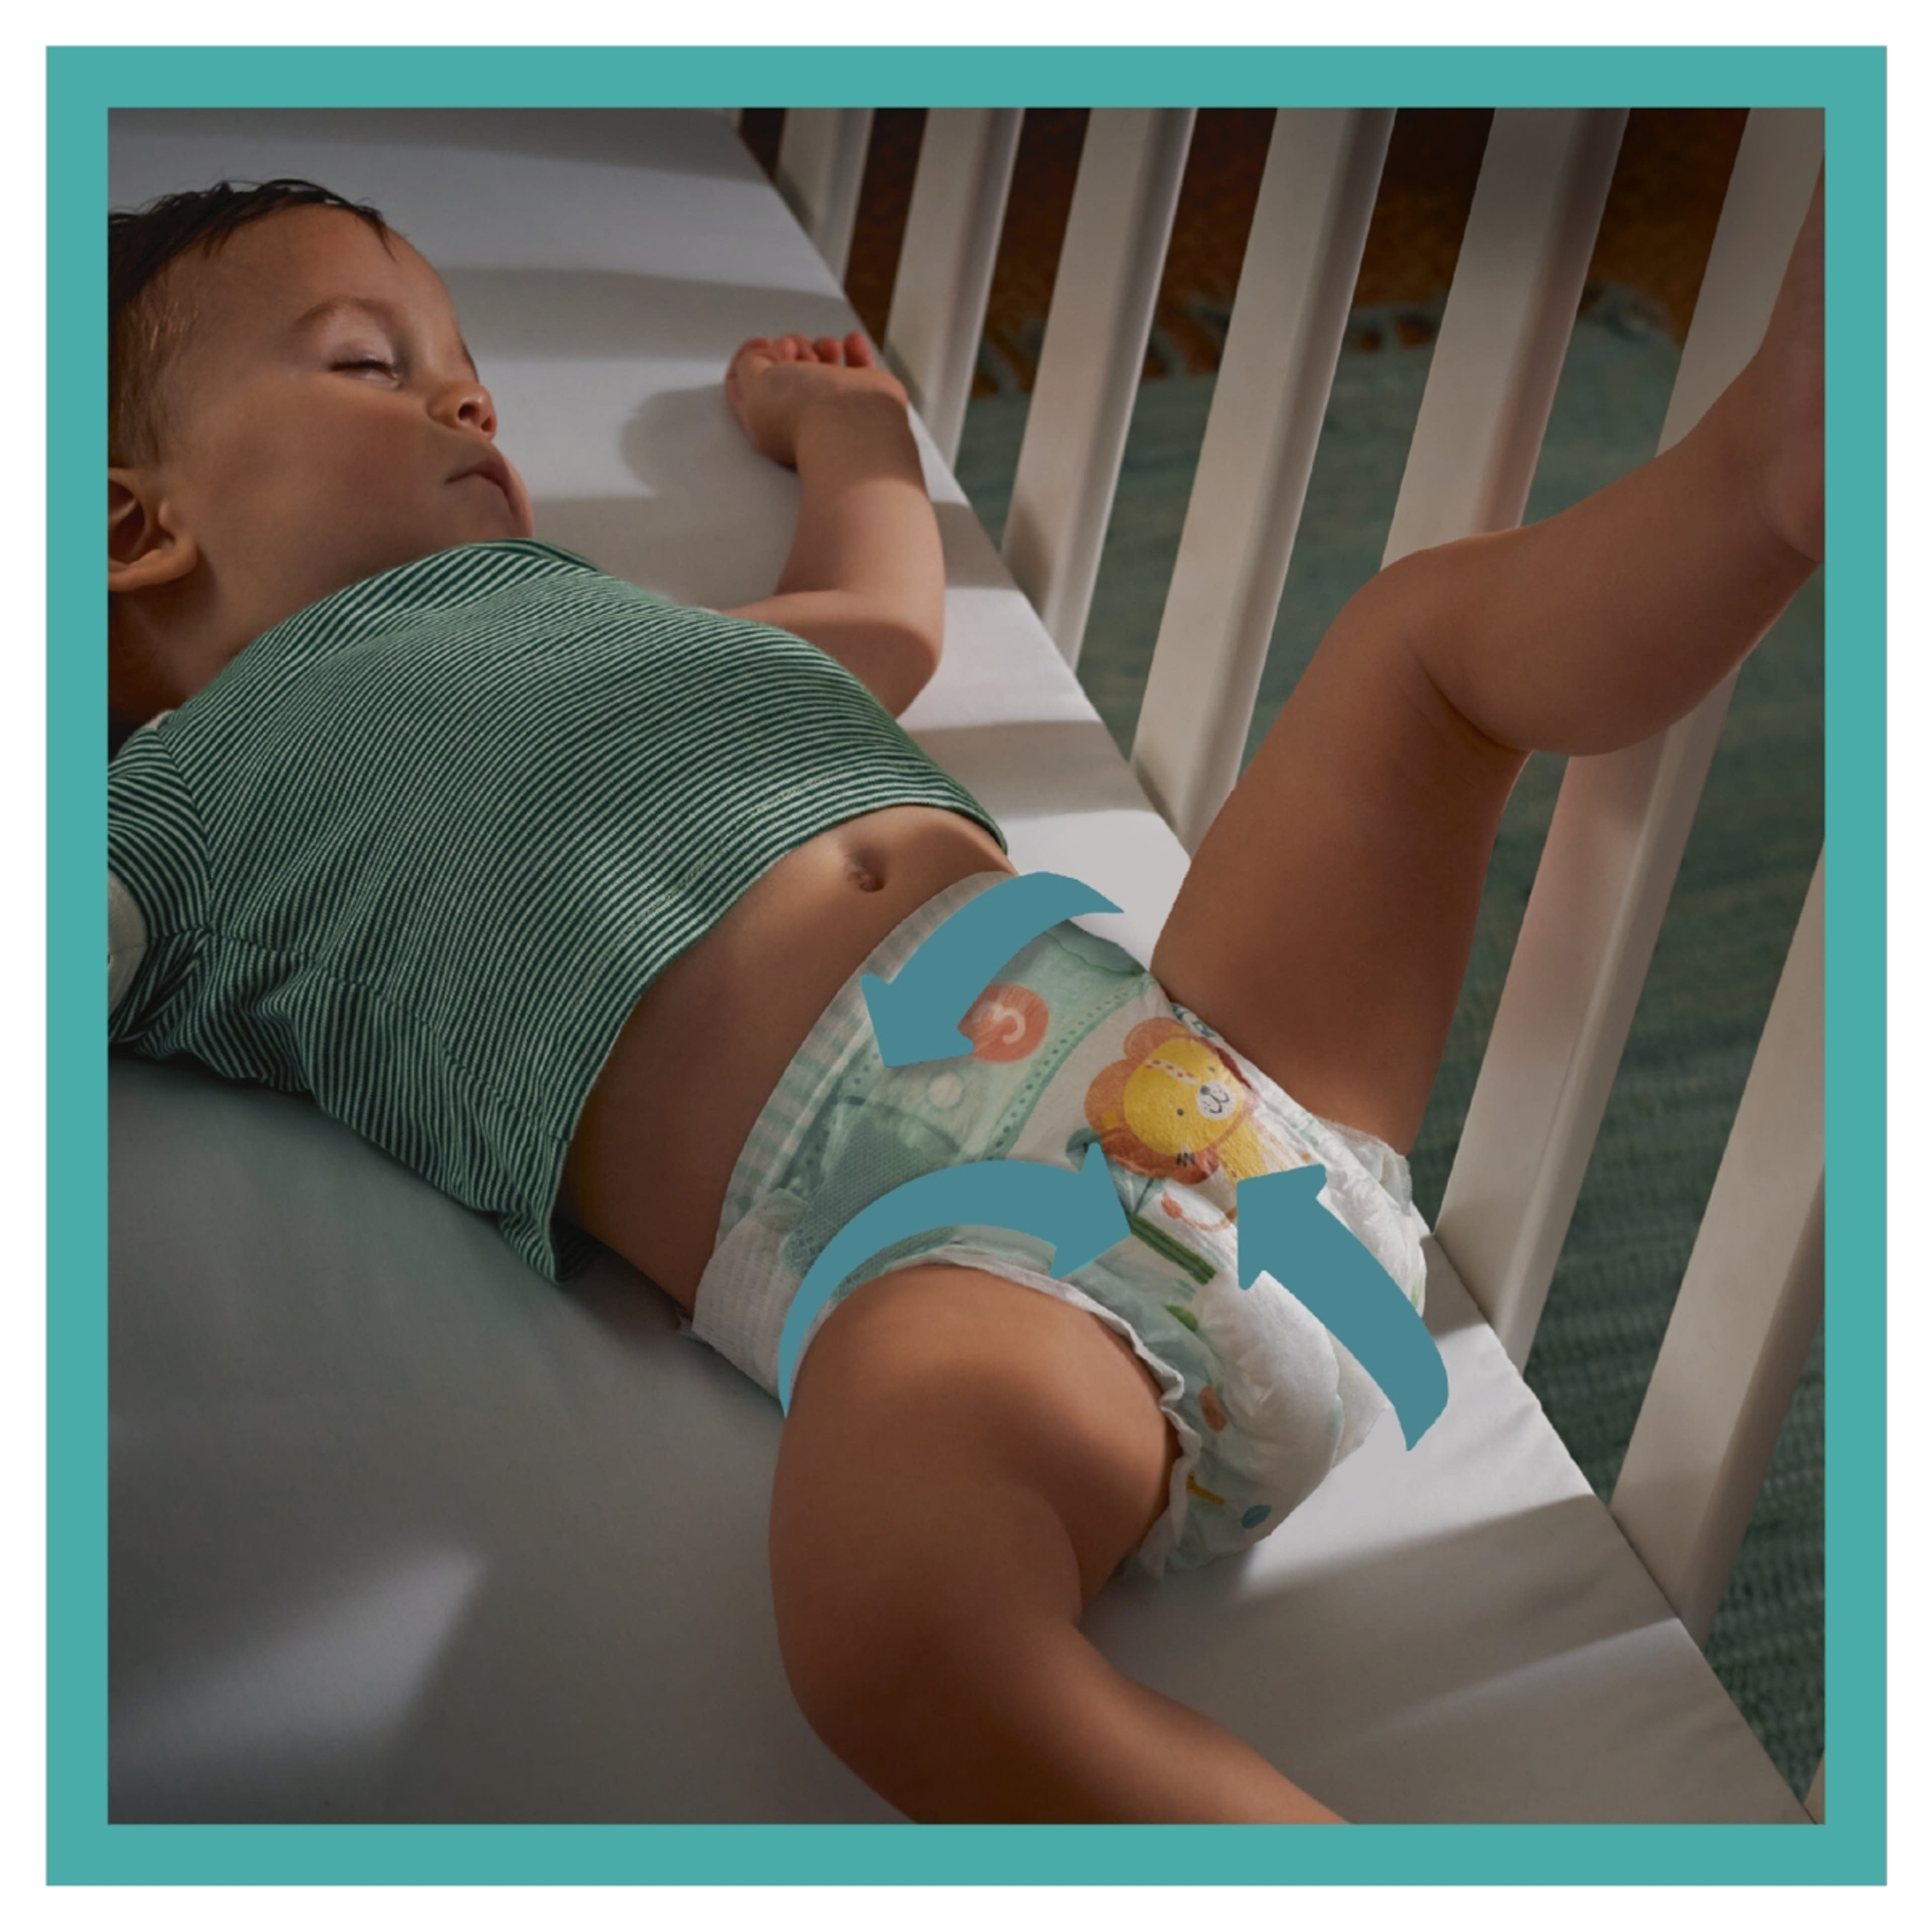 Pampers Giant Pack+ 5-os 11-16kg - 78 db-2